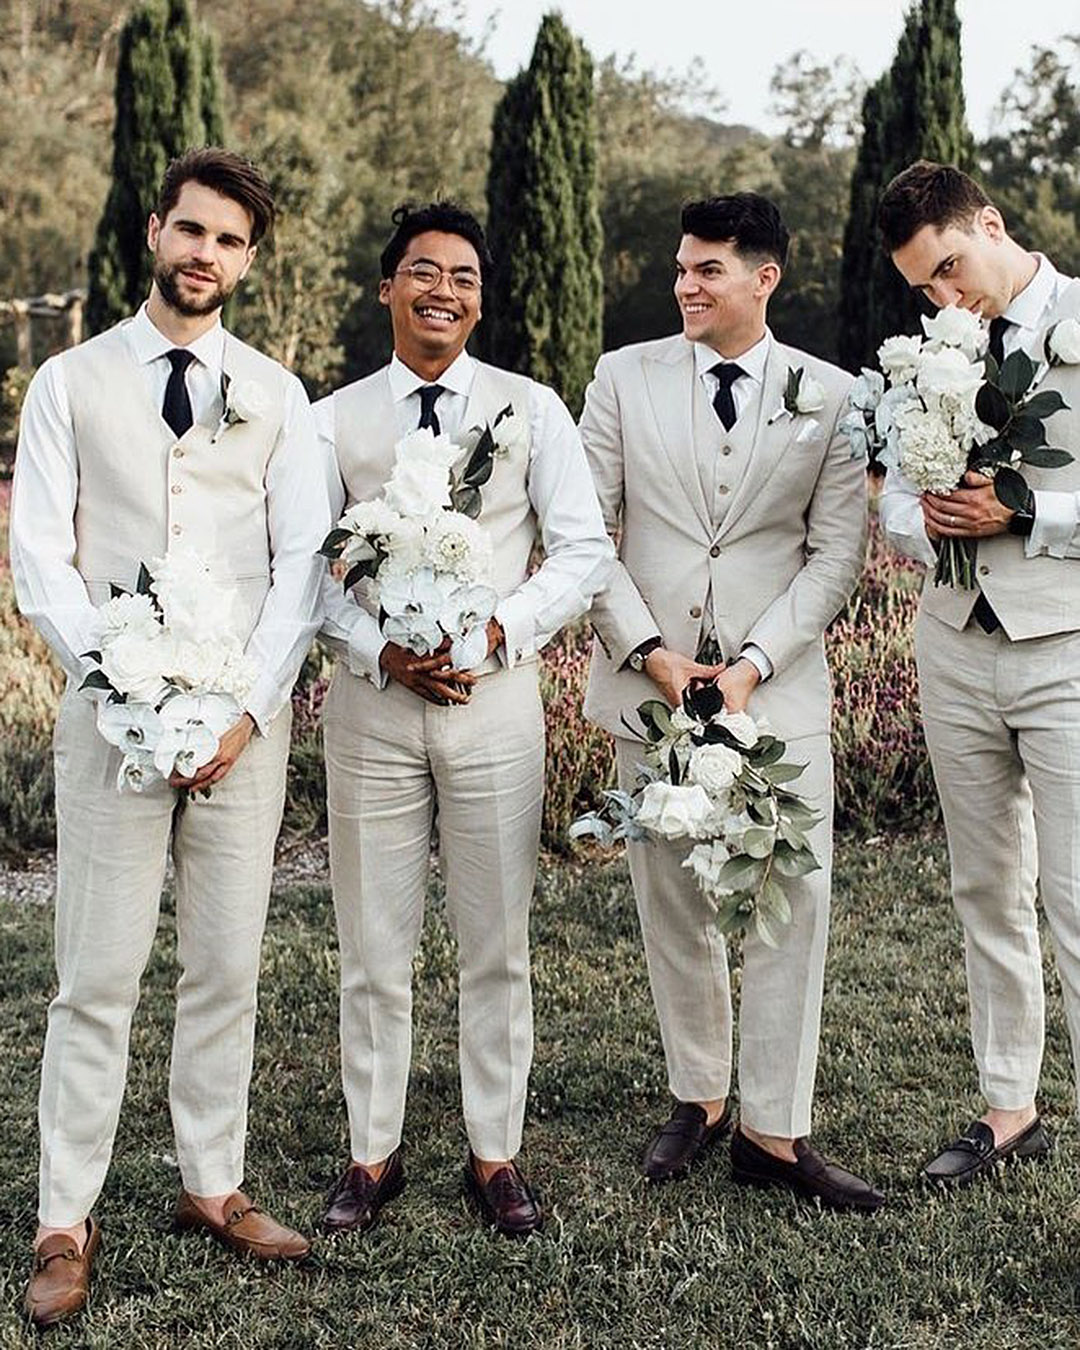 wedding trends groomsmen outfit trends sand colored suits